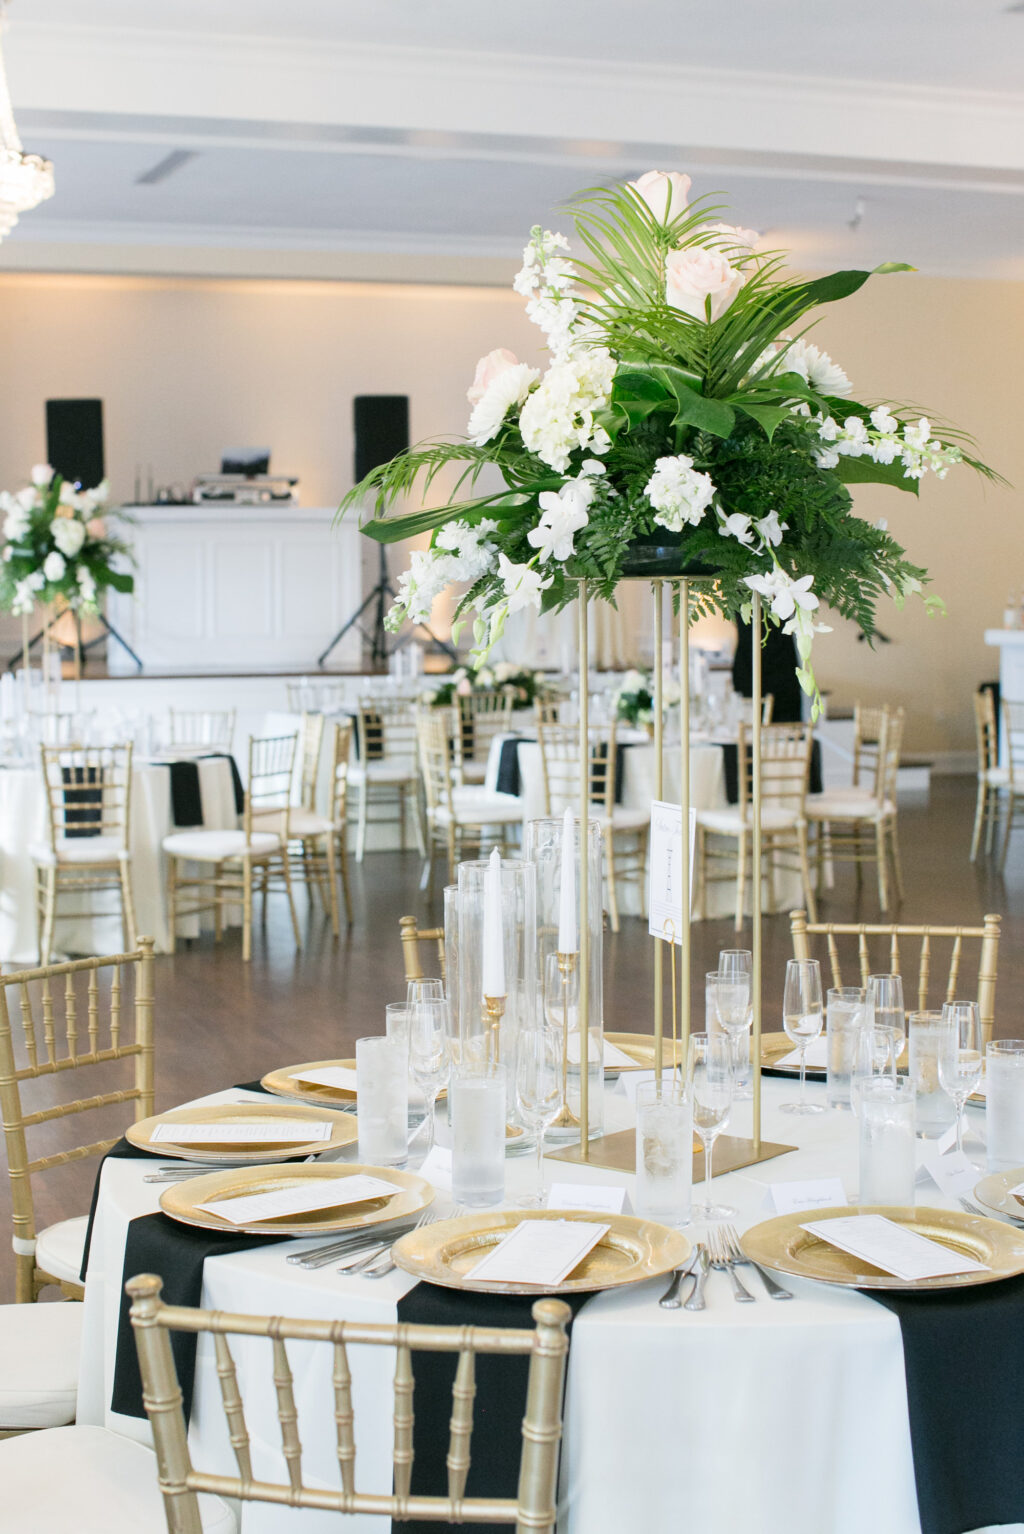 Elegant Tropical Tall Gold Flower Stand with White Tropical Flowers and Greenery Inspiration | Gold Chiavari Chairs | Ivory and Black Linens with Gold Chargers and Silver Flatware Wedding Reception Table Setting Ideas | Tampa Bay Rentals A Chair Affair